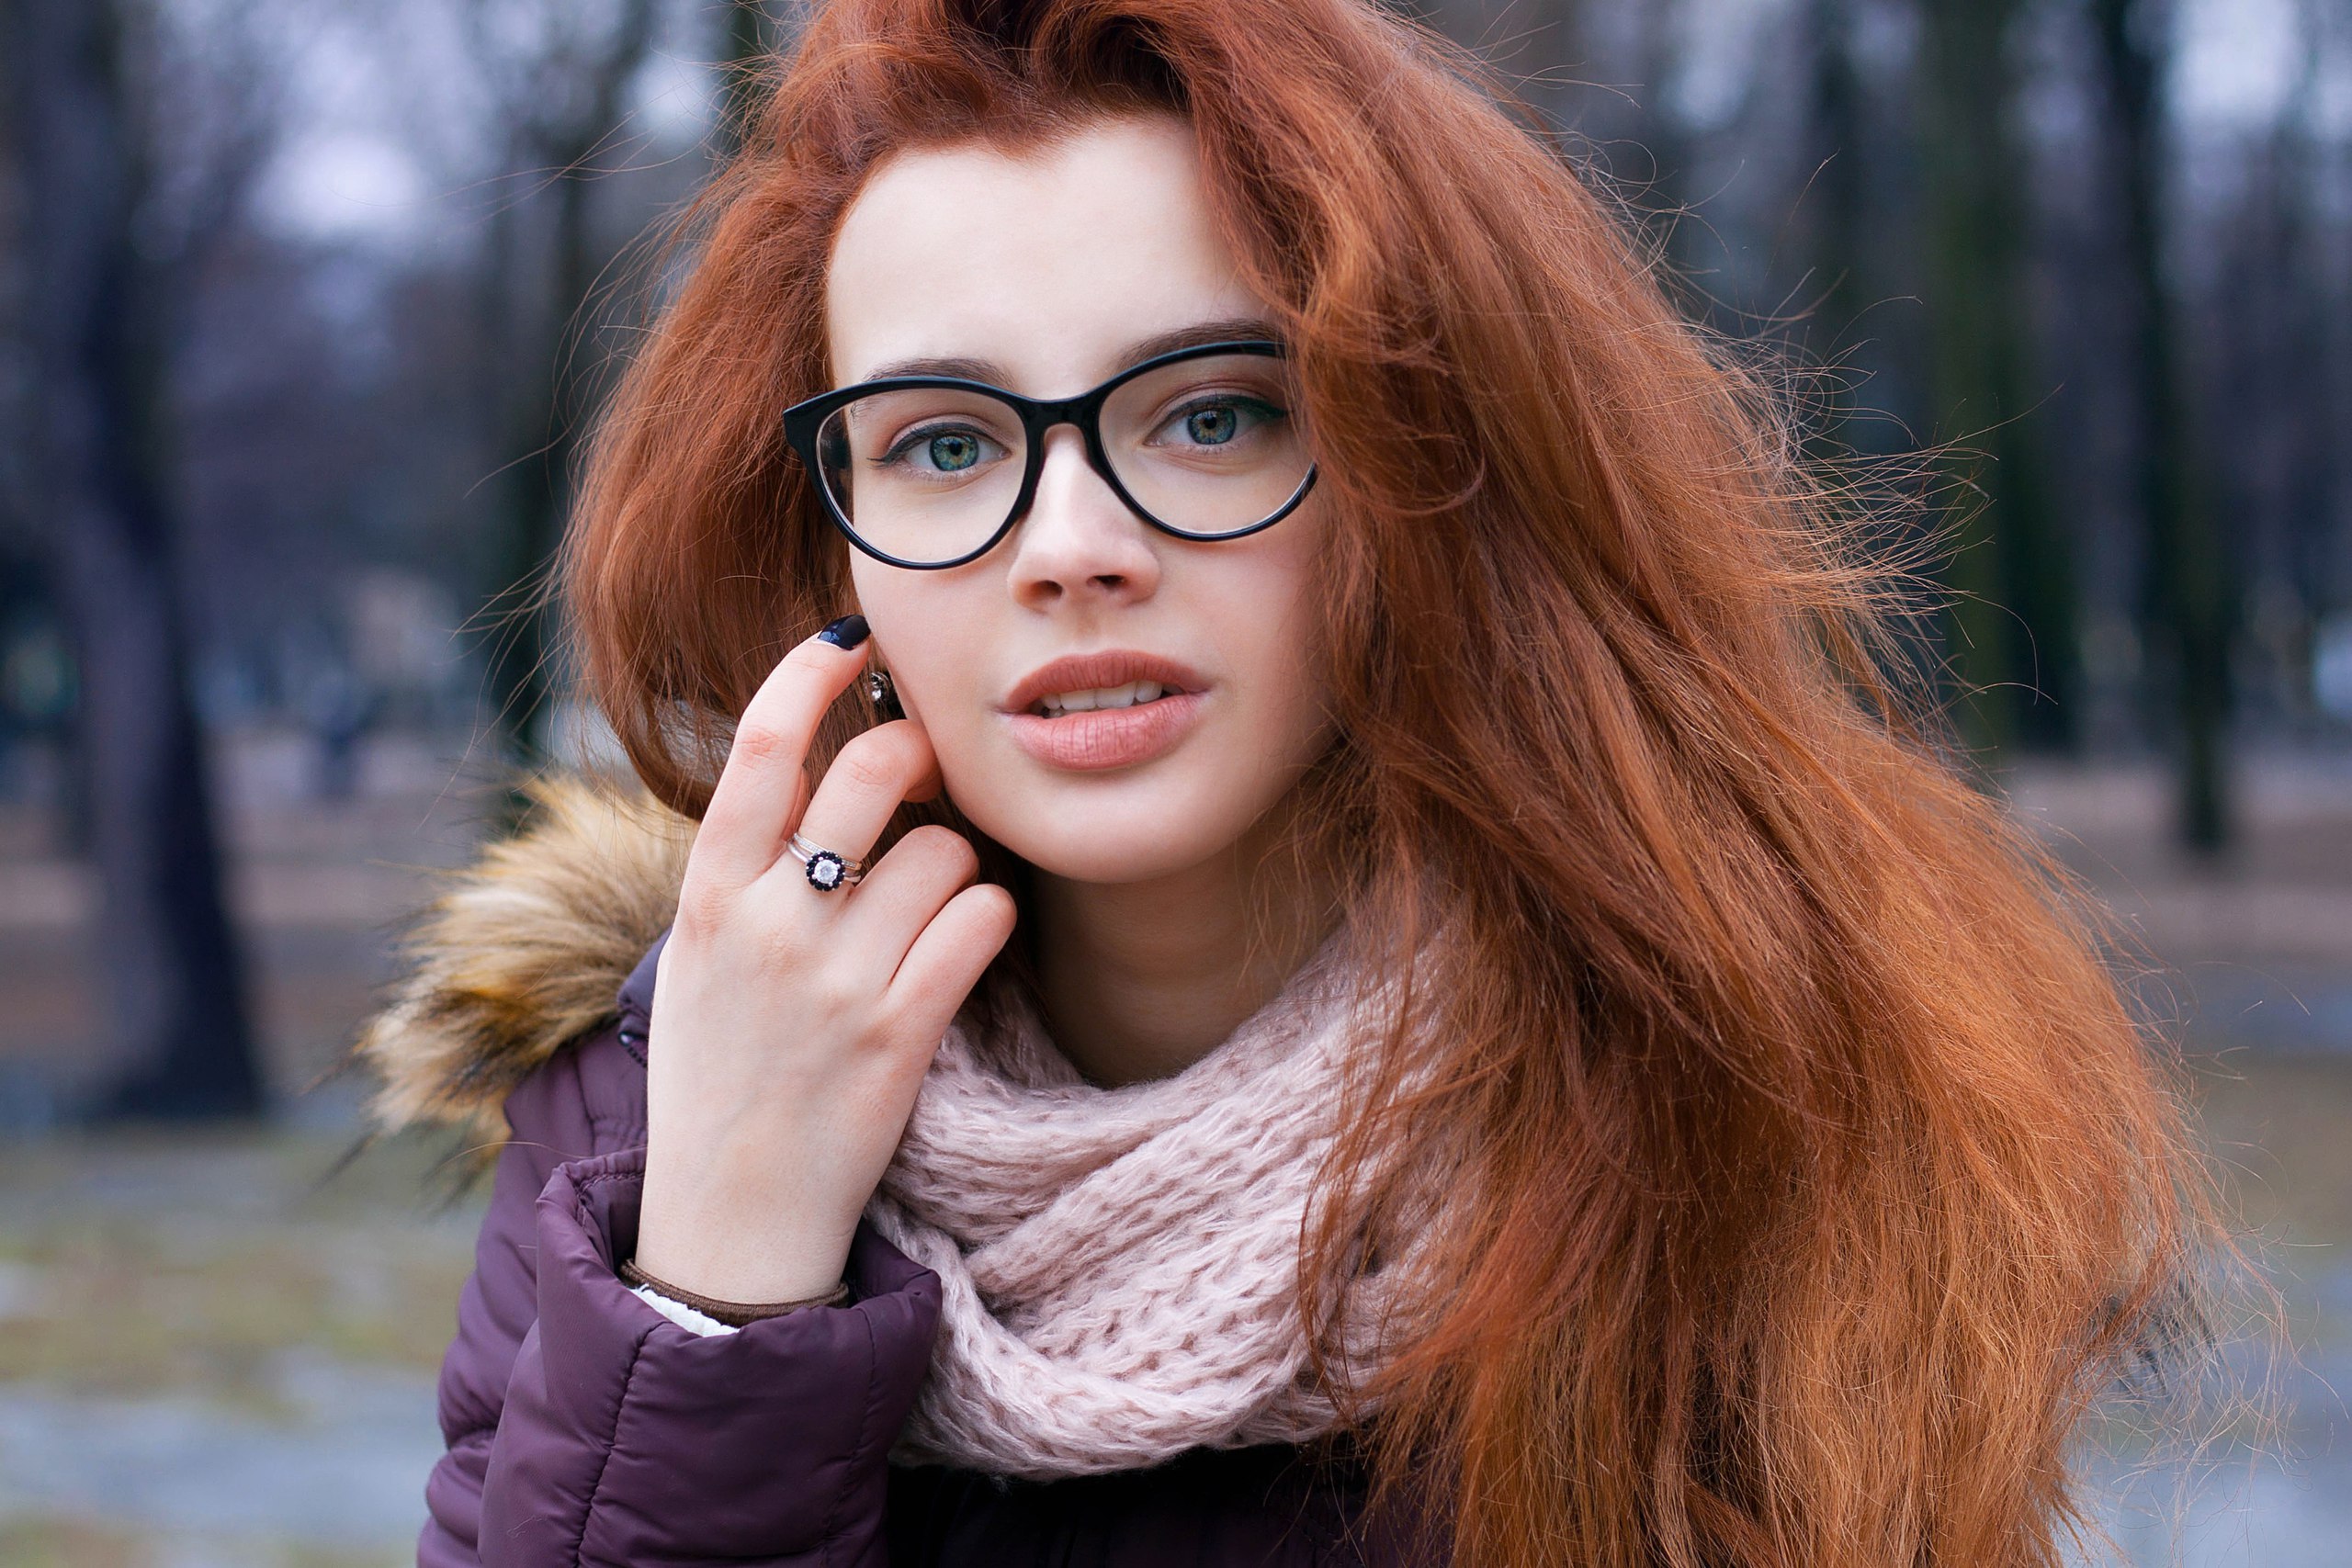 Women Redhead Women With Glasses Scarf Face Portrait Bokeh Hand On Face Glasses Jacket Purple Clothi 2560x1707